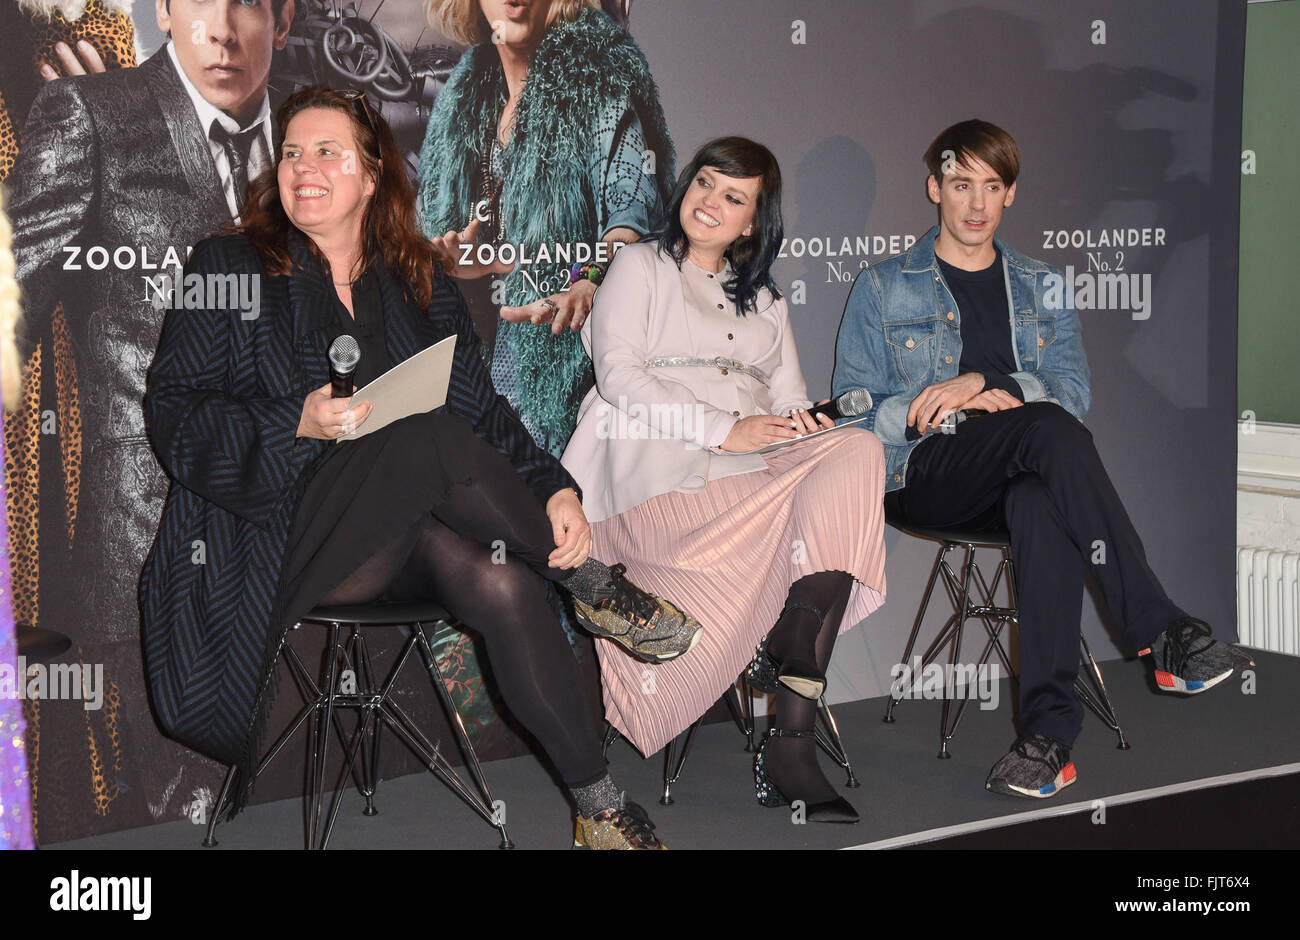 The Zoolander No. 2 Fashion Awards sponsored by Paramount Pictures Germany and Akademie Mode & Design (AMD) in Prenzlauer Berg.  Featuring: Vreni Frost, Ulrike Naegele, Kilian Kerner Where: Berlin, Germany When: 01 Feb 2016 Stock Photo